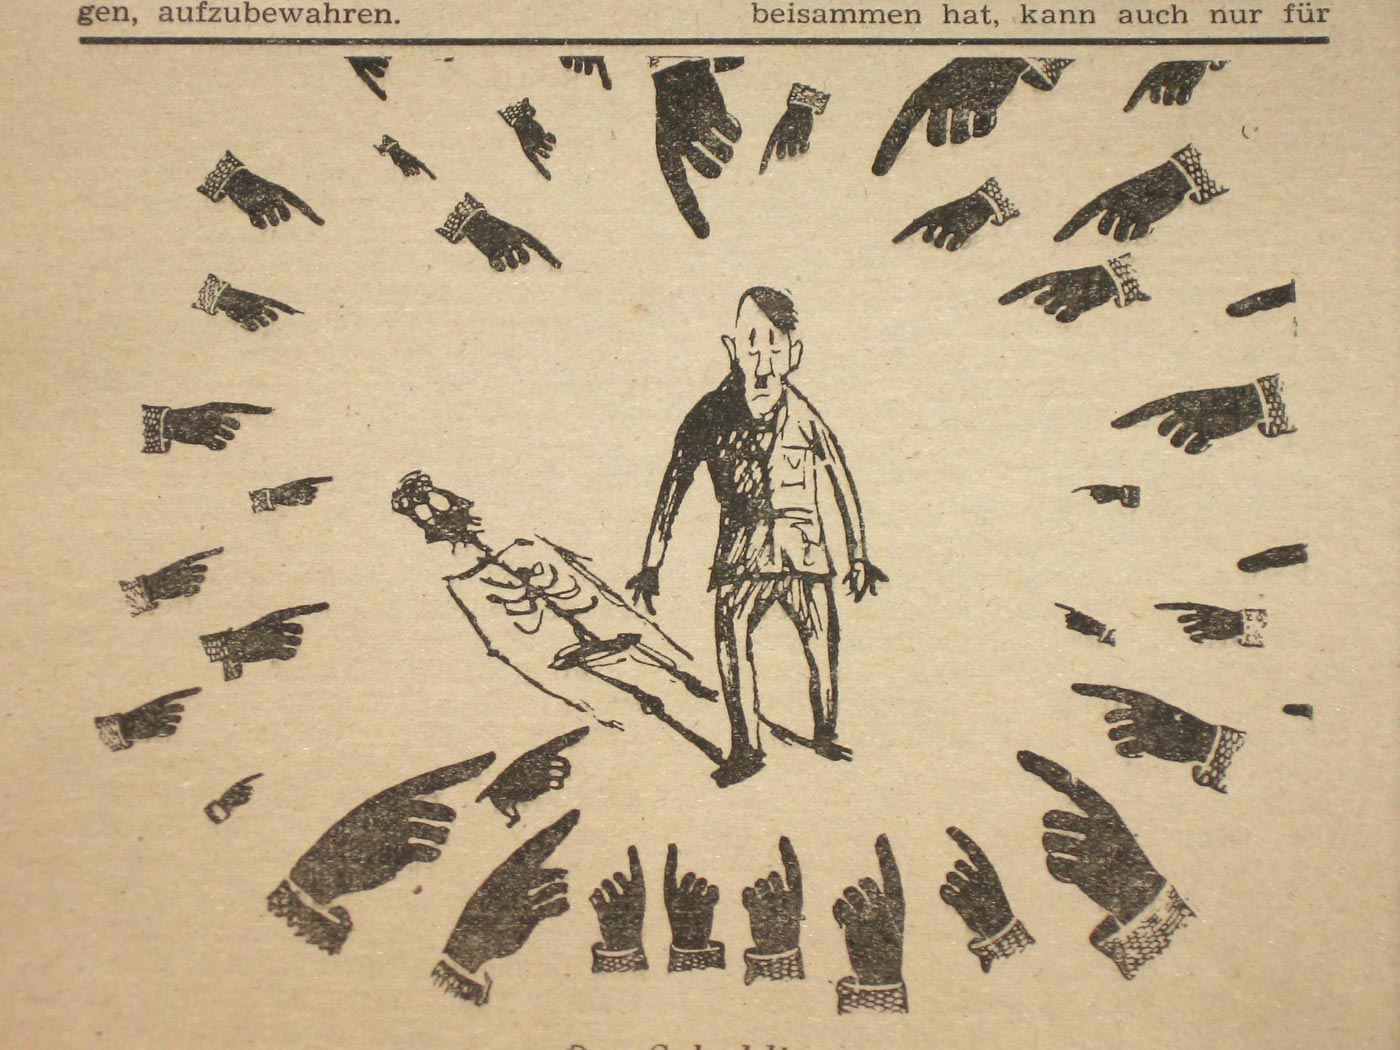 Der Schuldige (The Guilty One), in the July 26, 1944 issue of <em>Das Neue Deutschland</em>, a fake Resistance newspaper produced by the OSS Morale Operations.